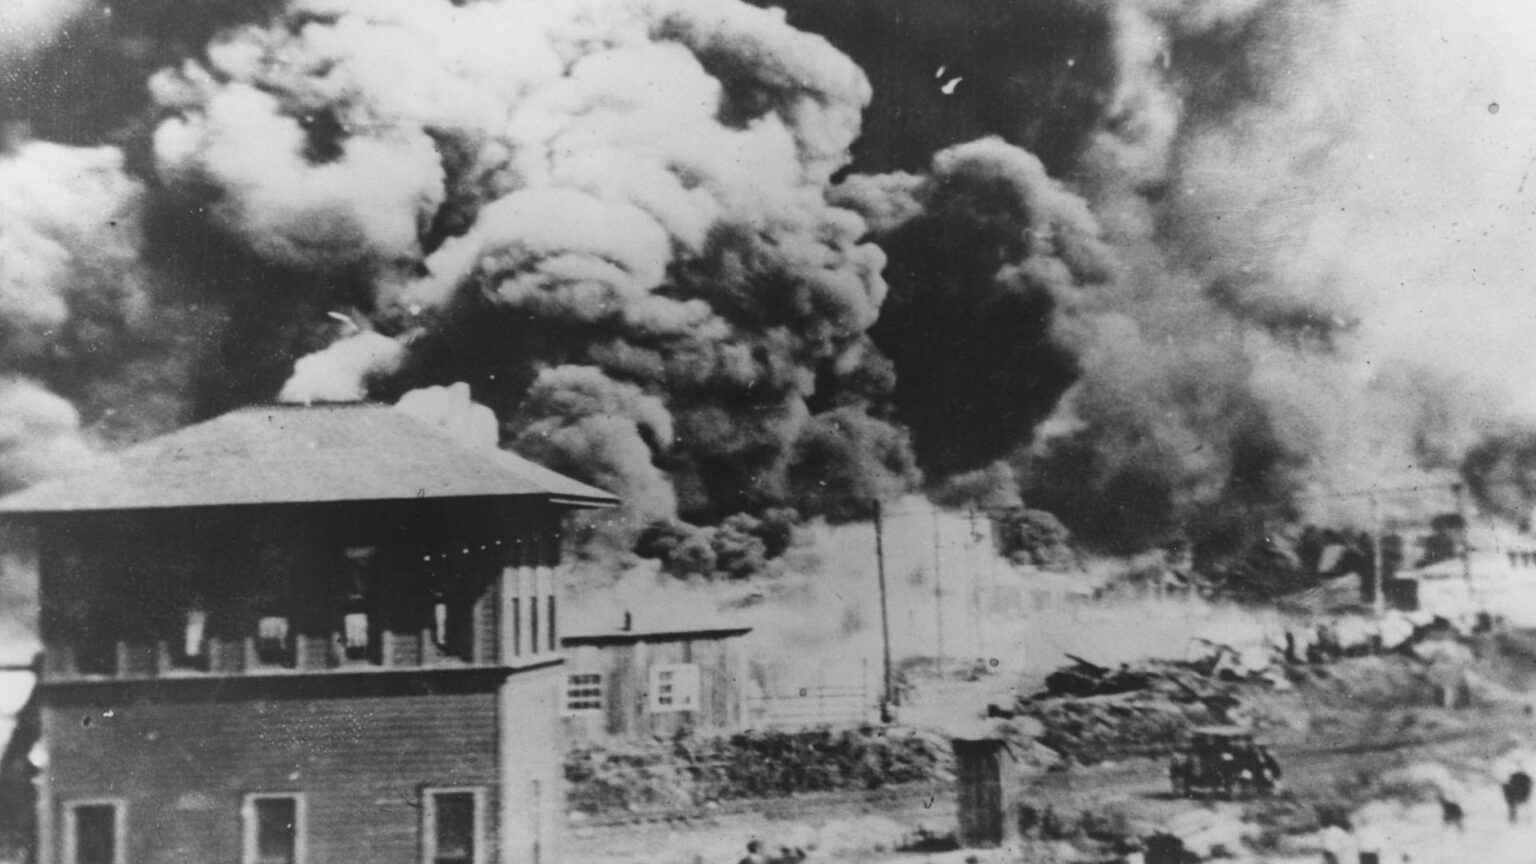 Nearly 100 years later, the Tulsa race massacre is becoming a part of discussed history, and so Hollywood is poaching it for movies and TV shows.